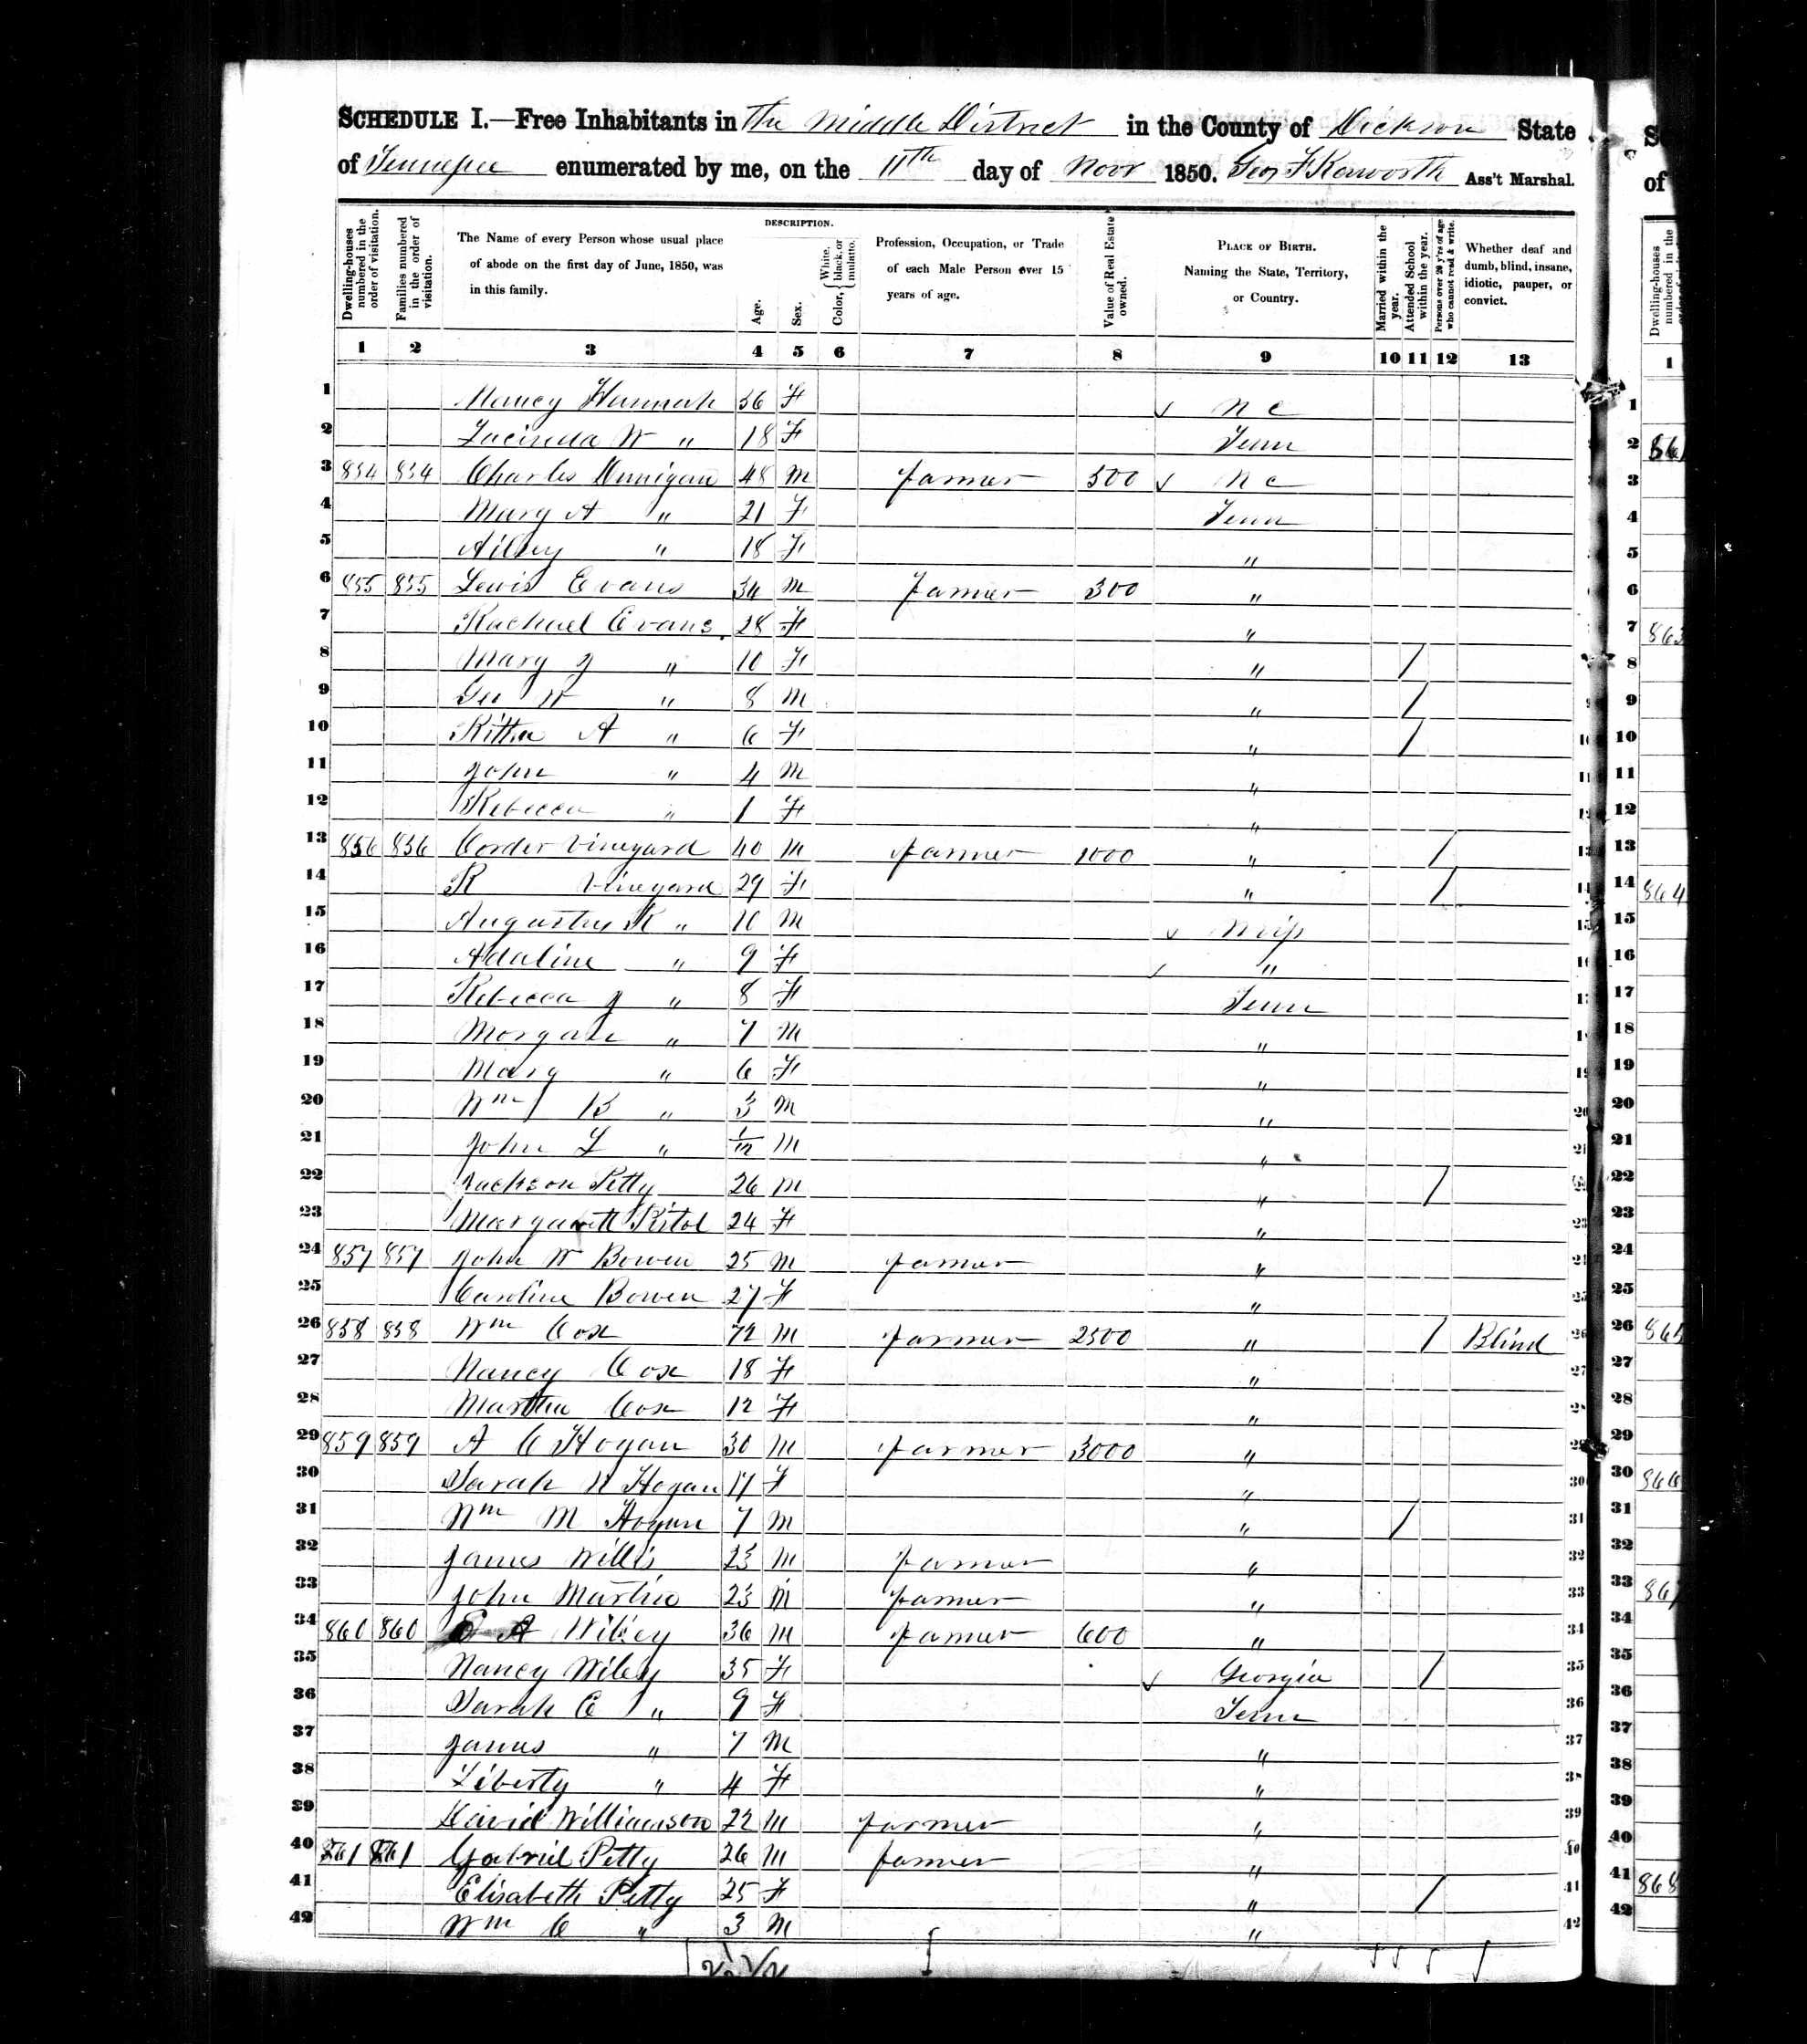 Lewis Evans and wife Rachael Brazzell, 1850 Dickson County, Tennessee, census